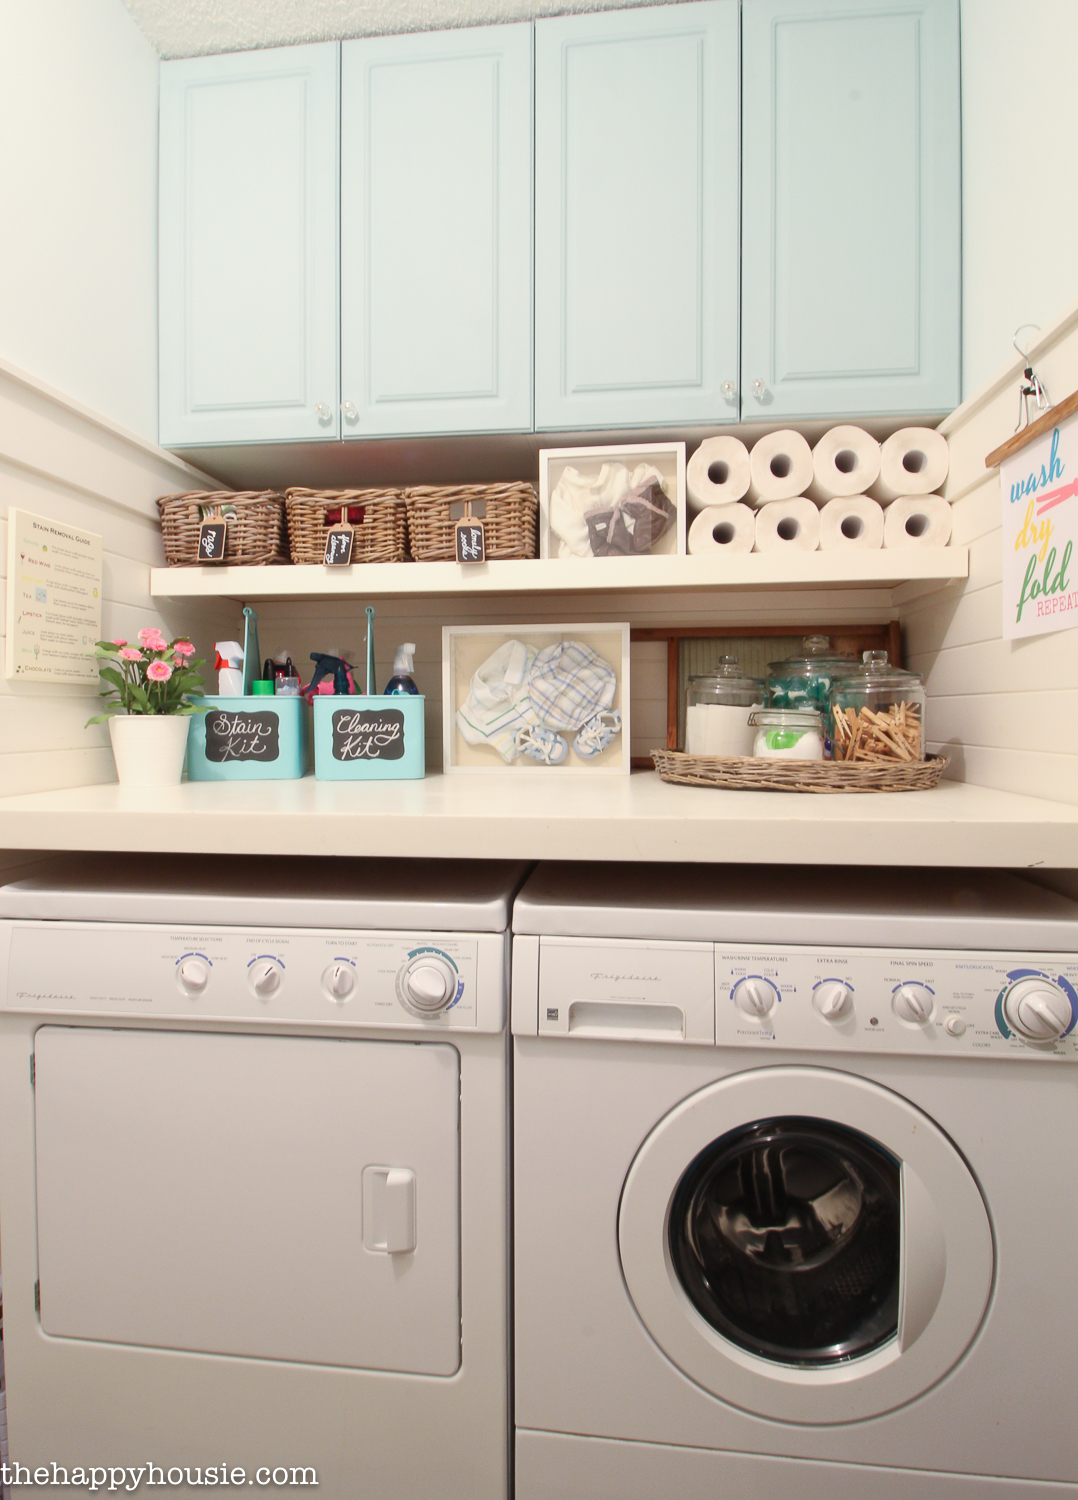 Laundry room decor with a washer and dryer.